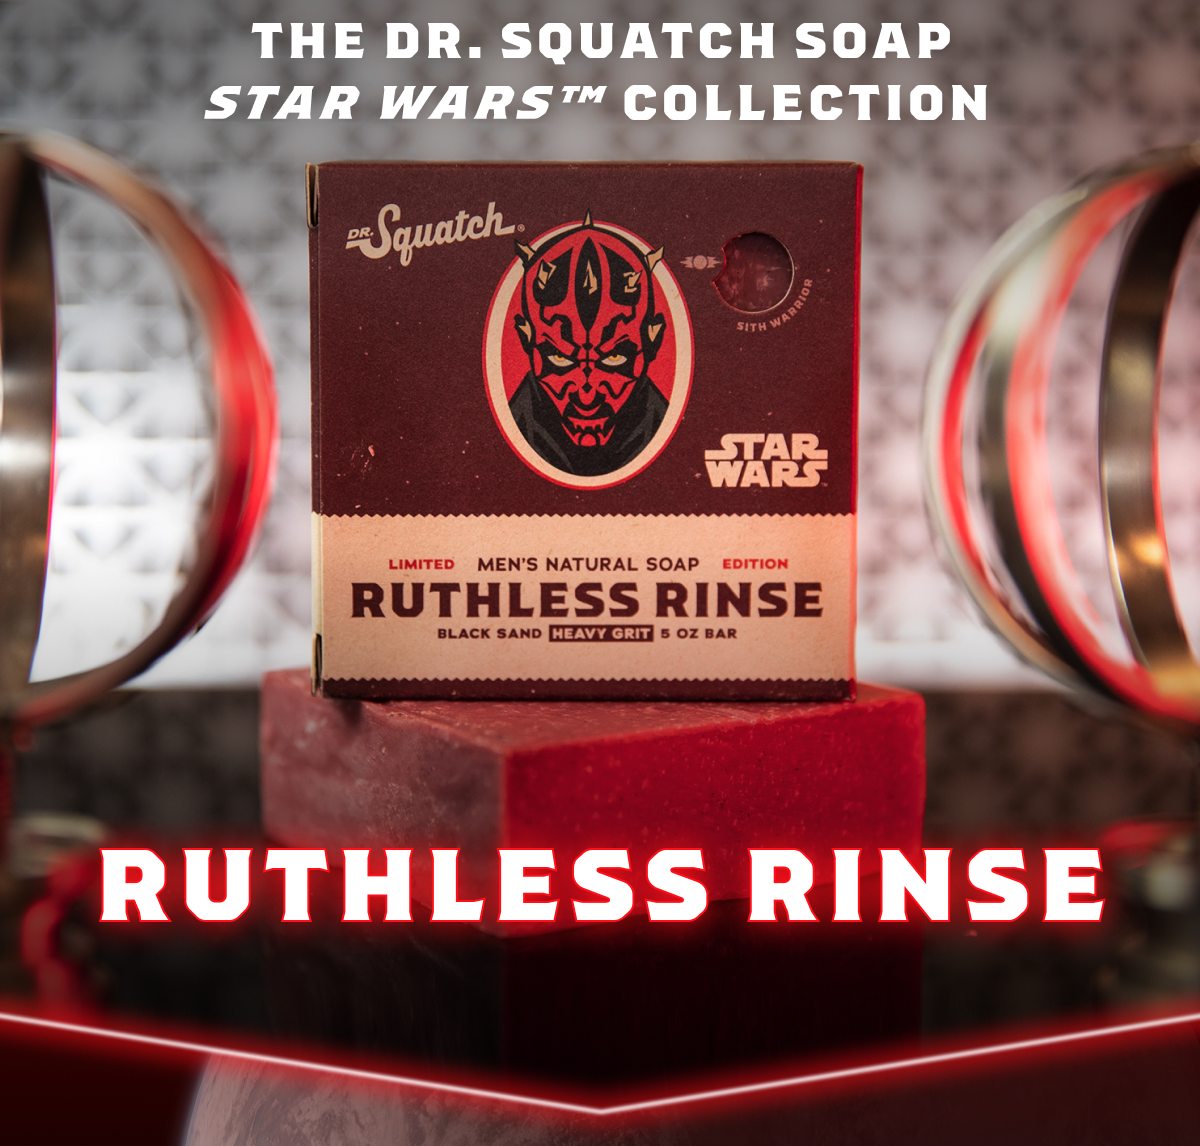 Dr. Squatch Ruthless Rinse - Star Wars LIMITED EDITION SALE! 1 Bar